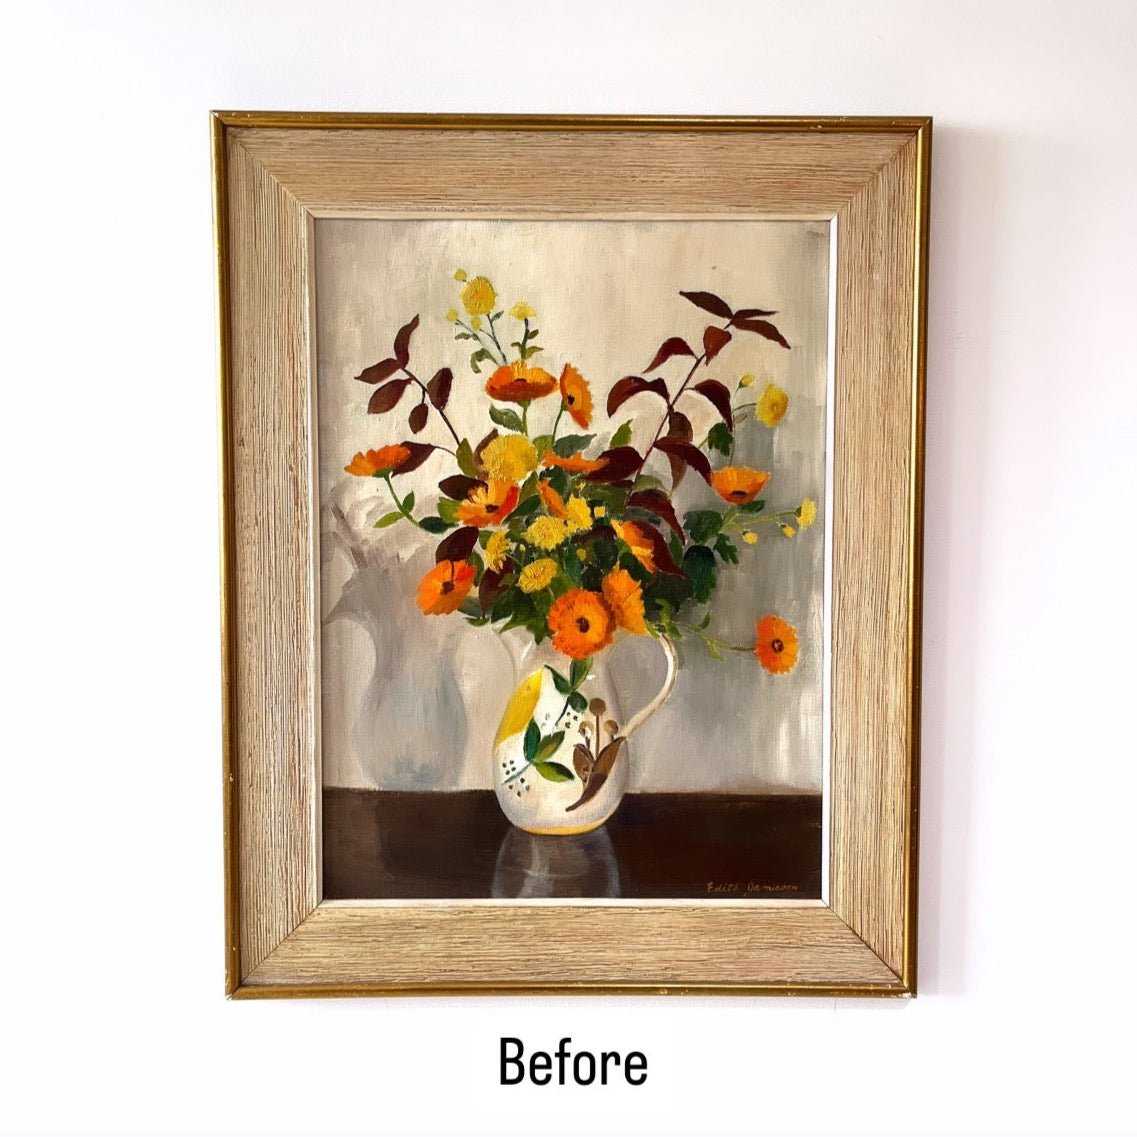 A Stunning Bouquet, original upcycled vintage painting